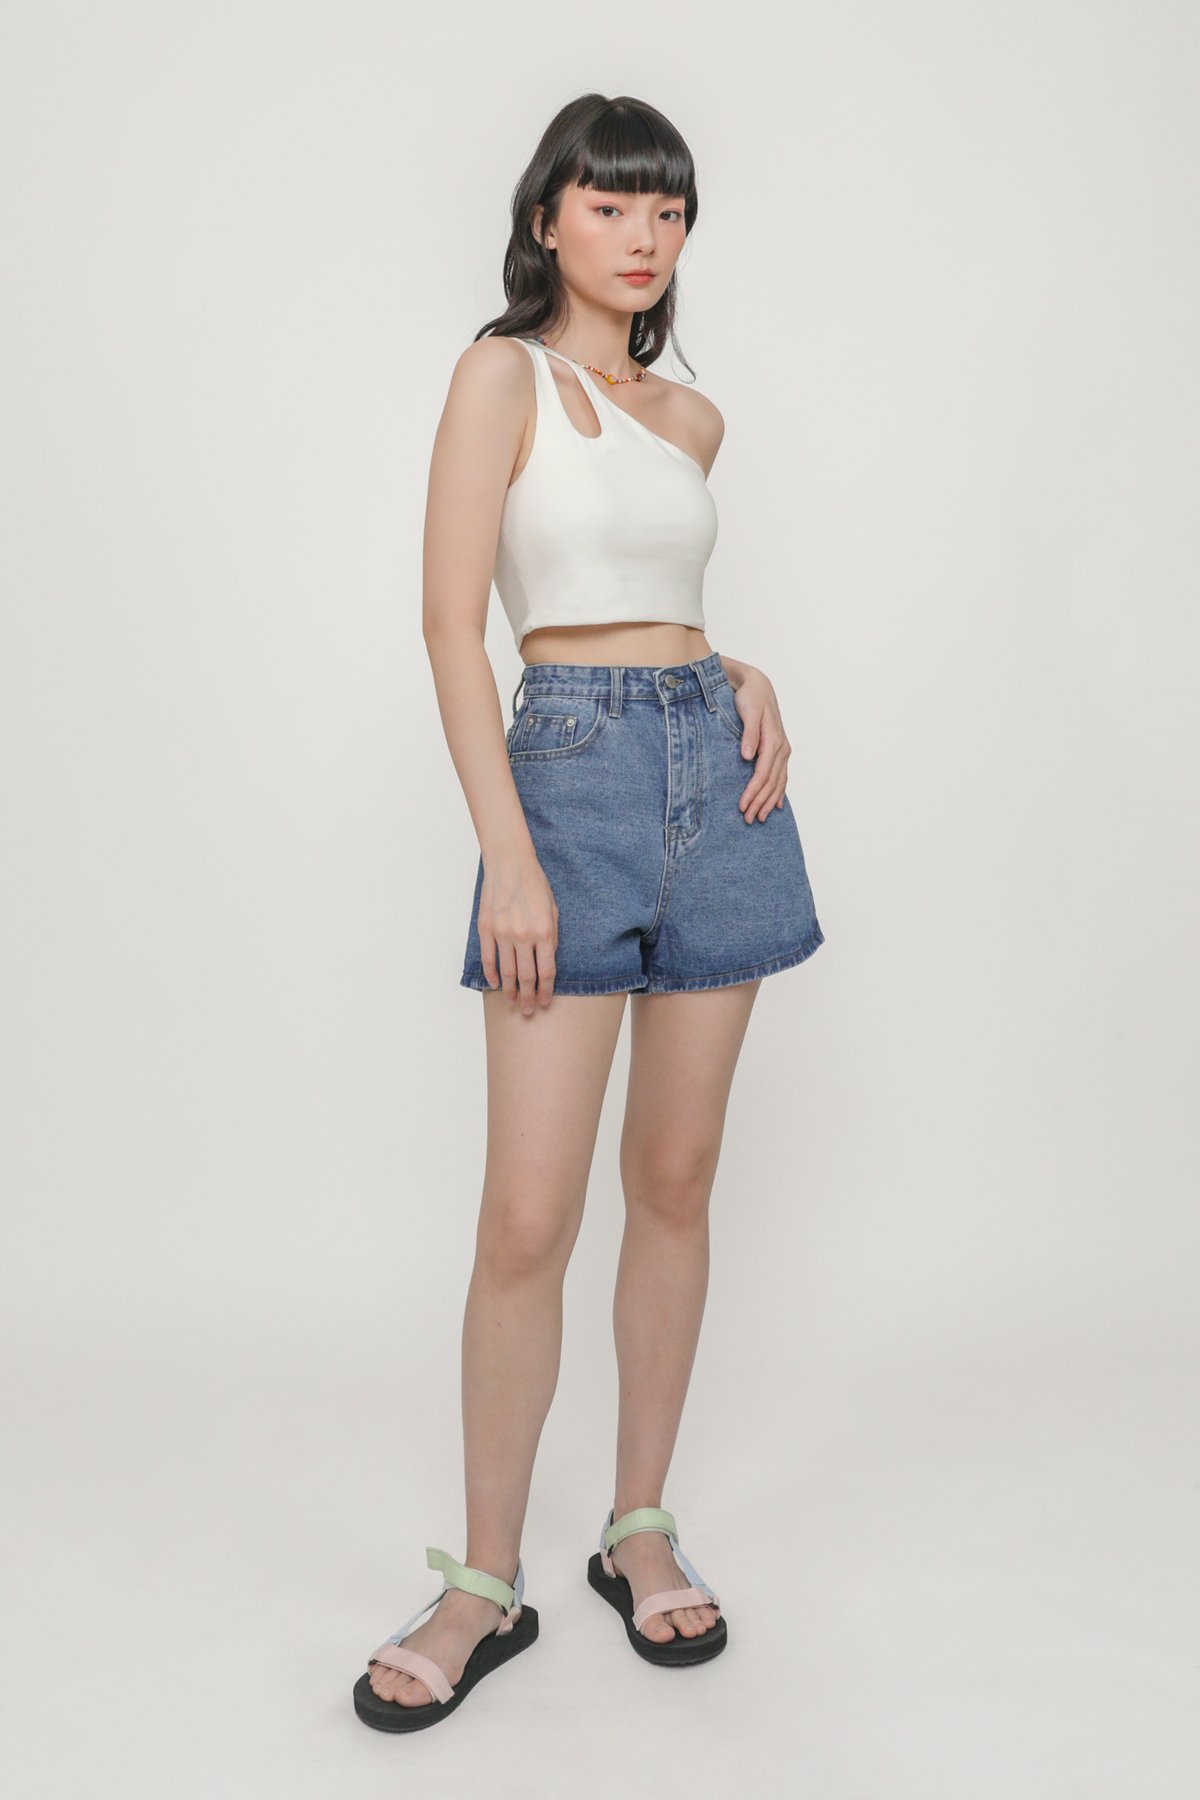 Jax Cut Out Toga Padded Top (White)